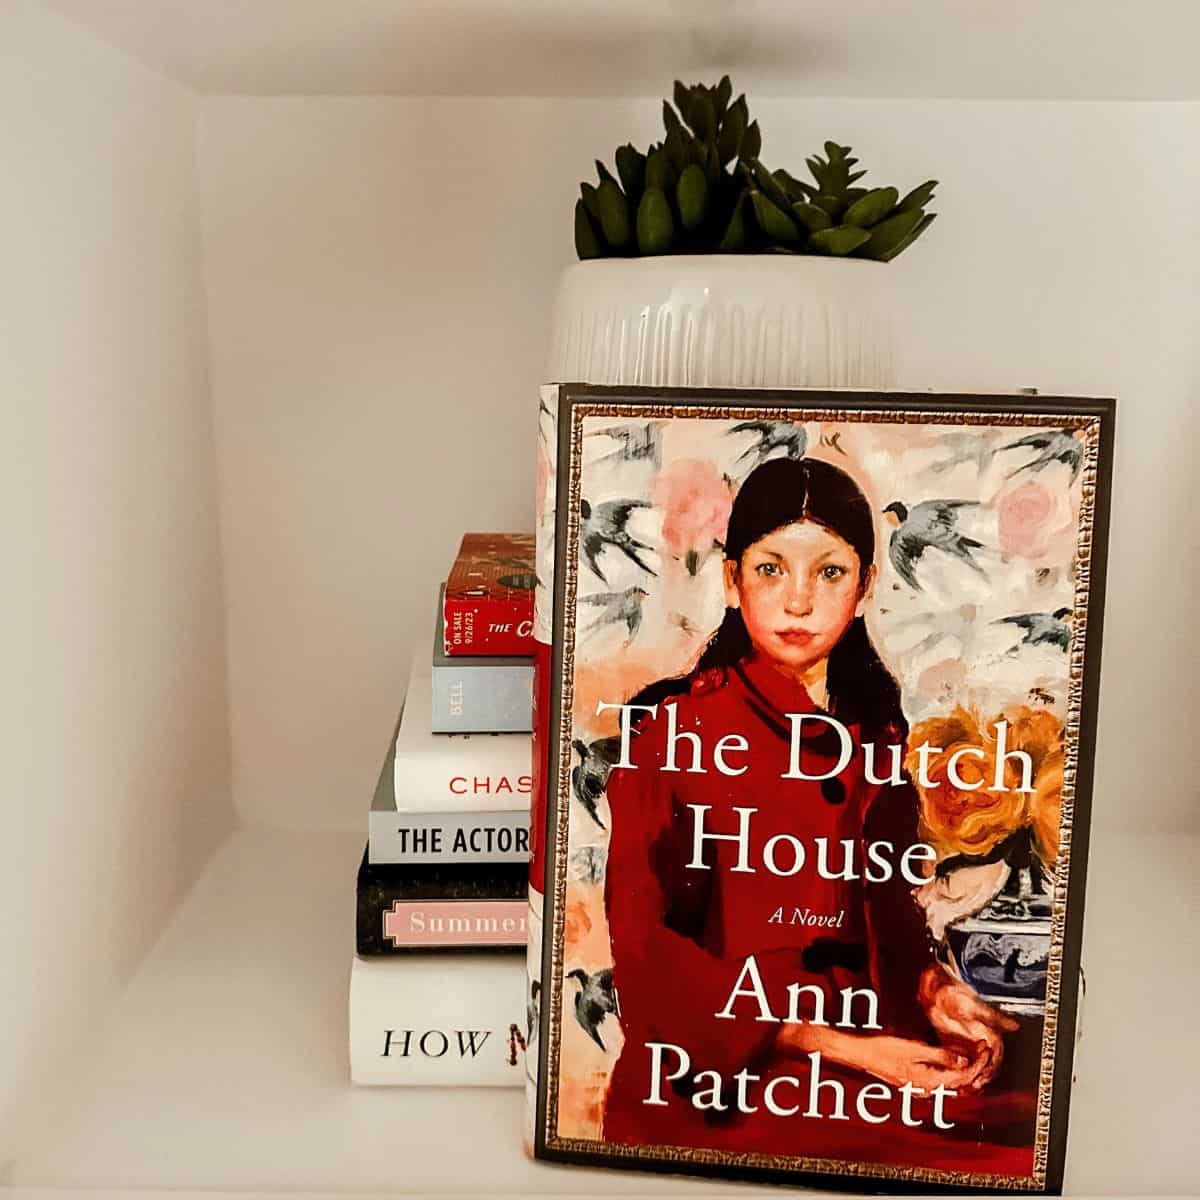 the dutch house by ann patchett on a bookshelf with books and a plant.